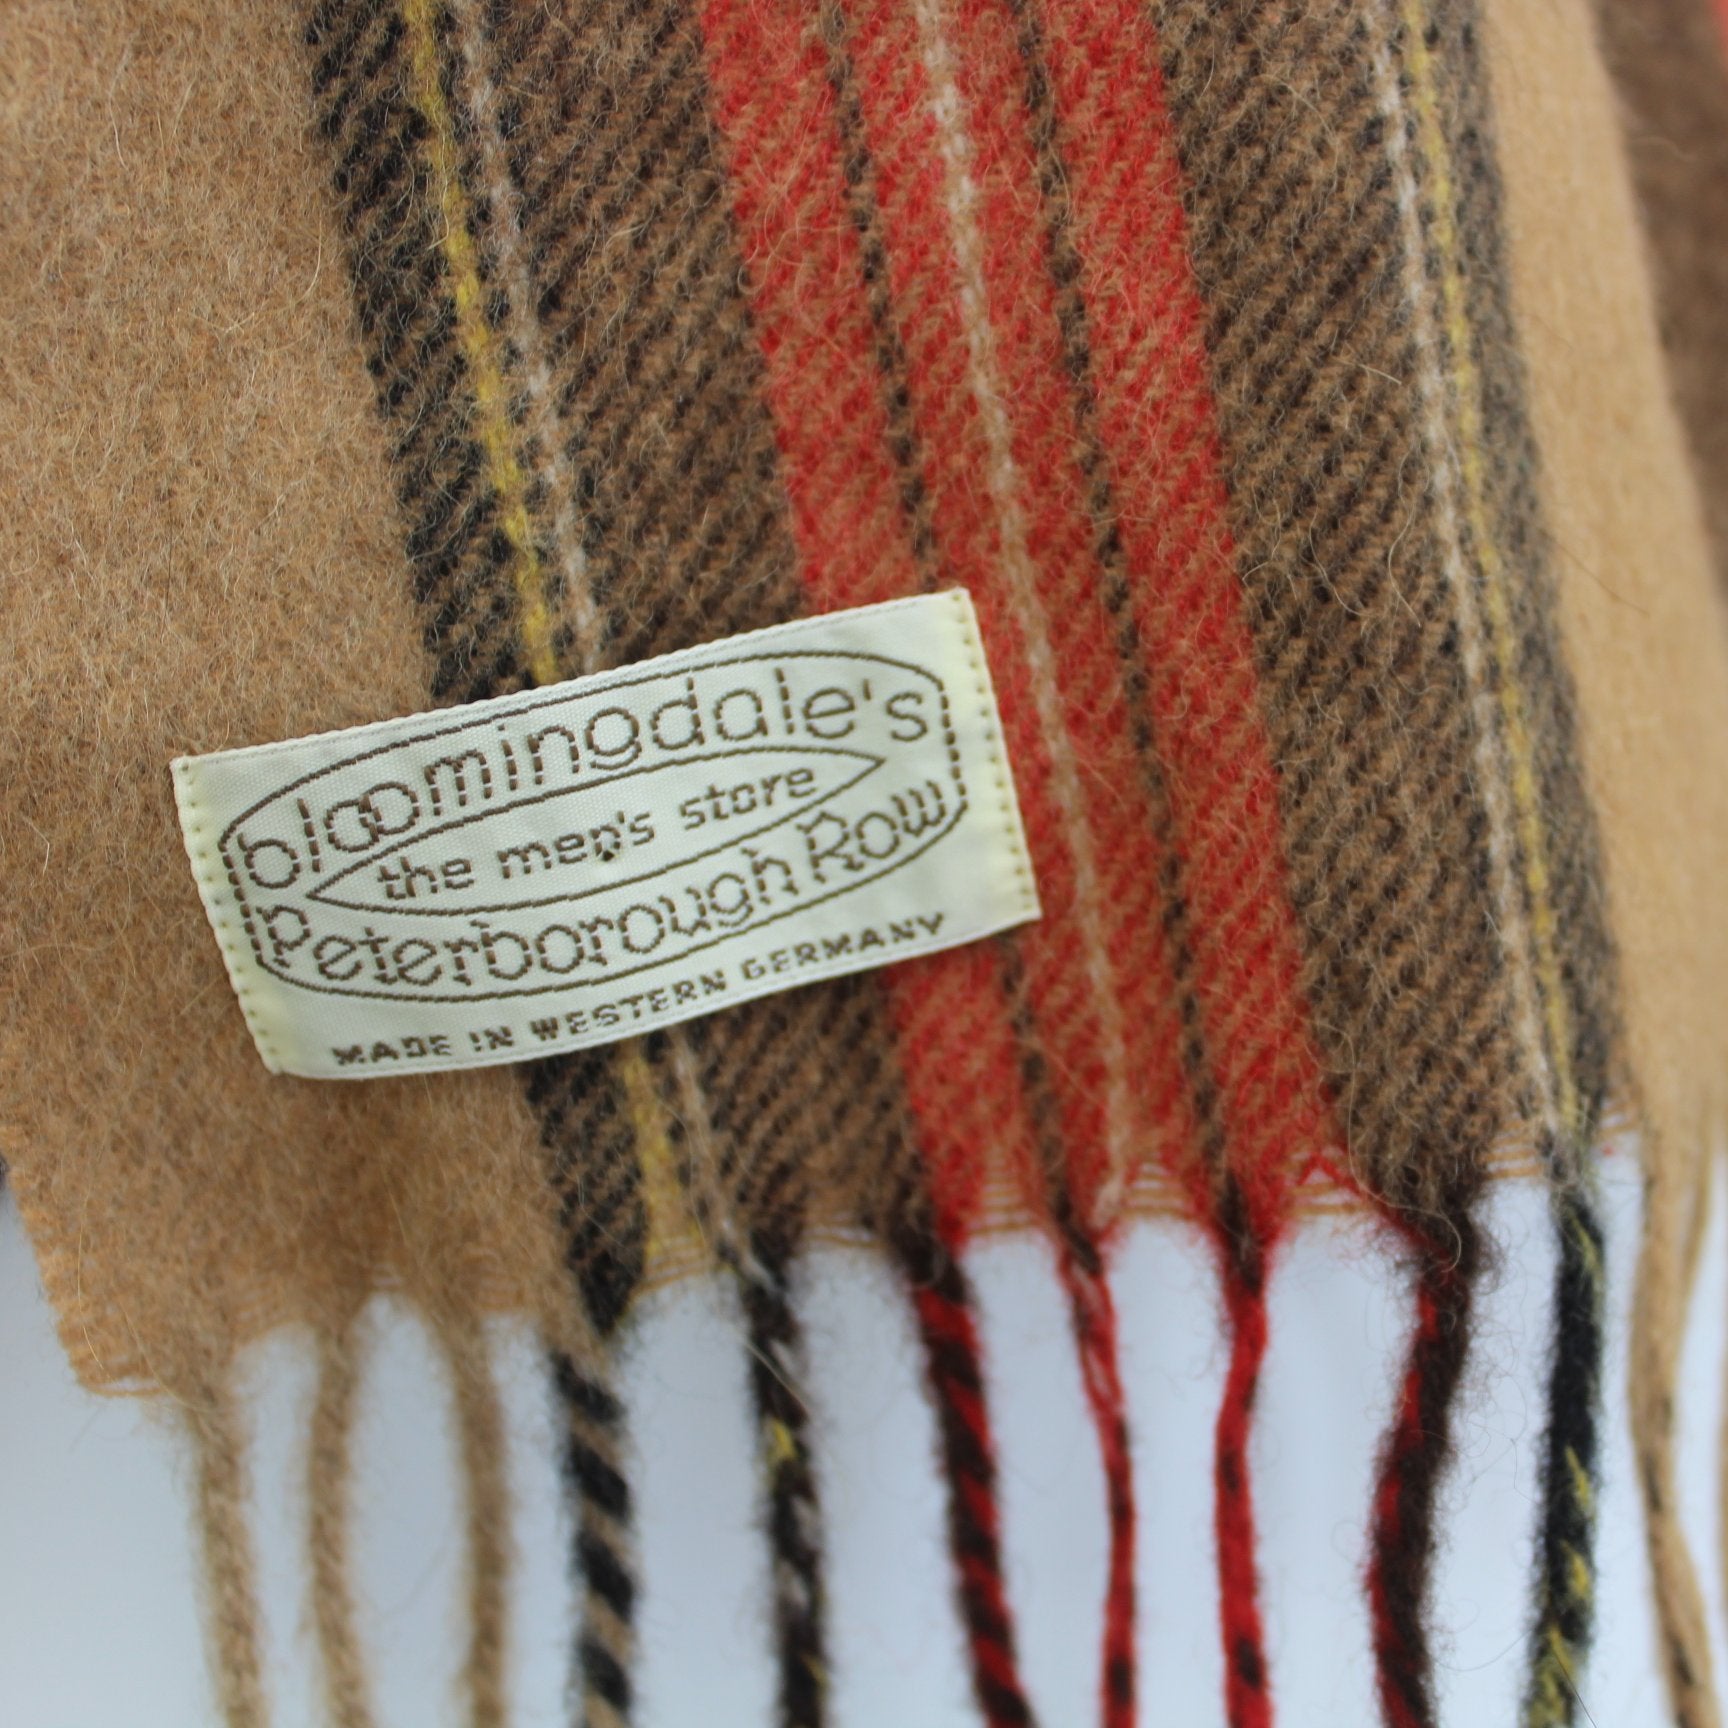 Neck Scarf 100% Cashmere Camel Red Plaid Bloomingdales Peterborough Row Made W Germany bloomingdale's tag